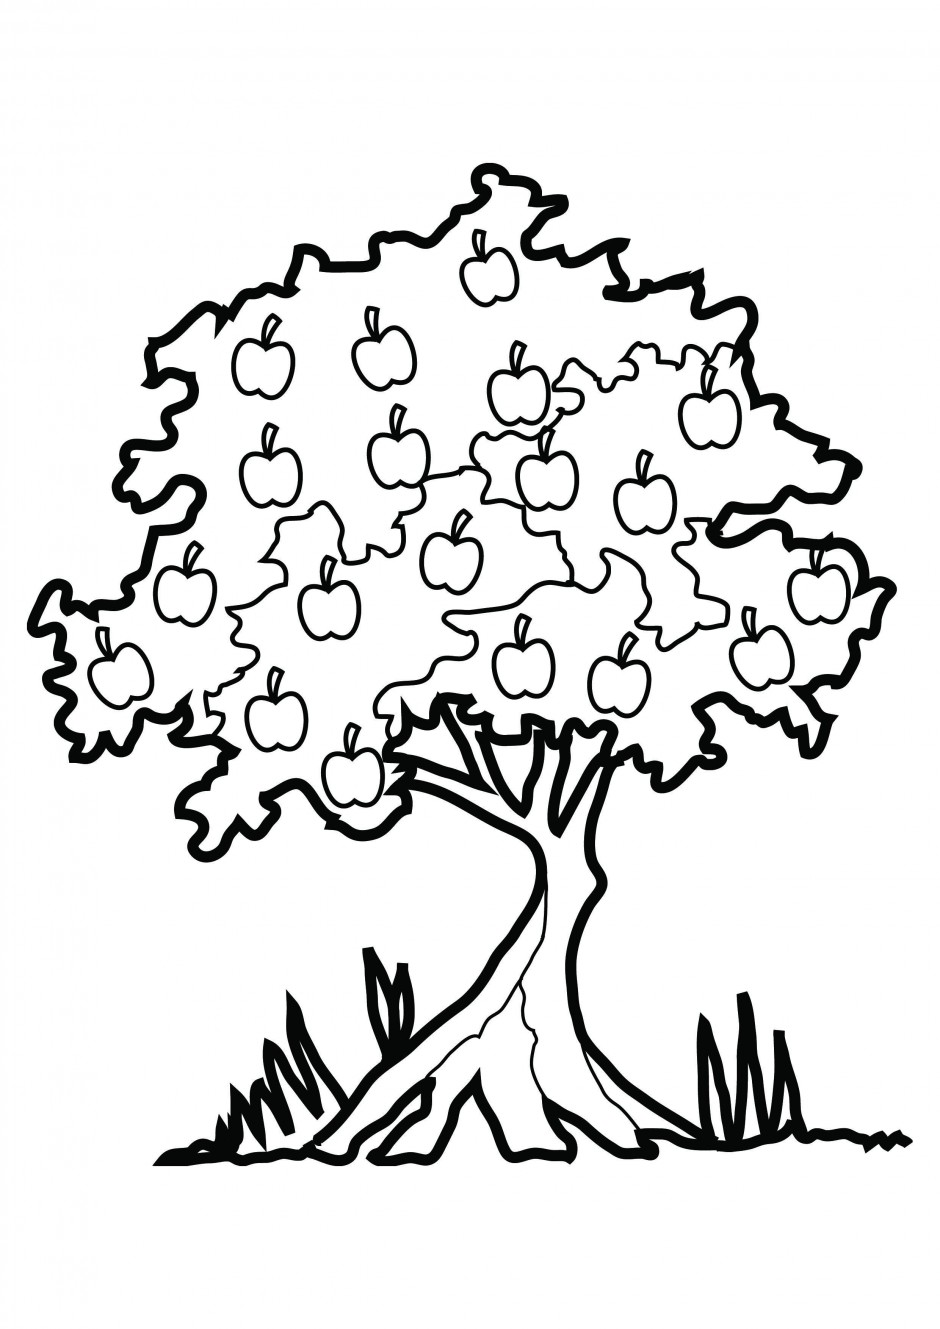 Coloring Pages Draw A Tree Coloring Pages inside Oak Tree A Shady ...